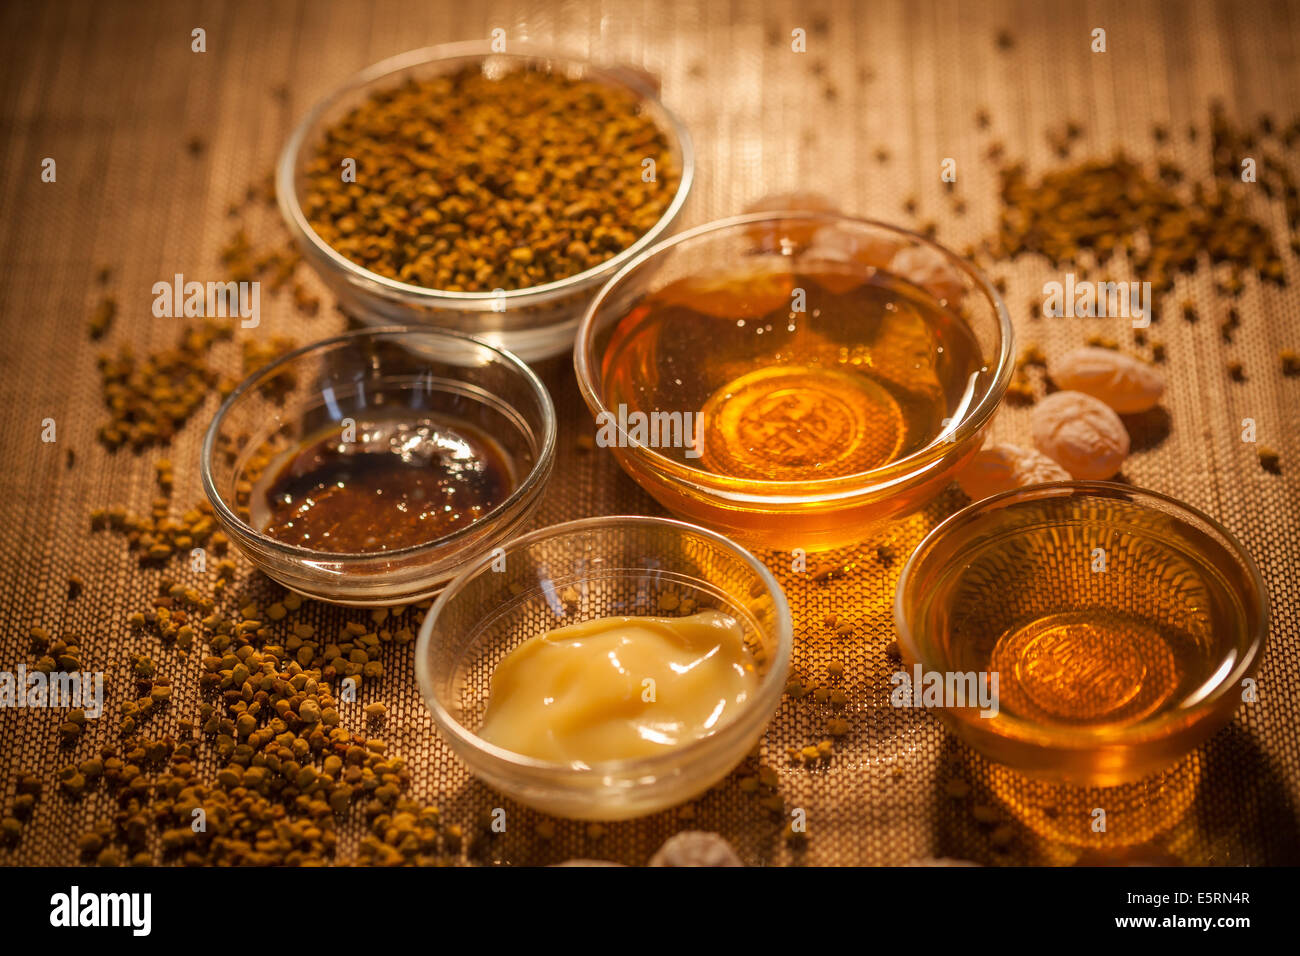 Various apiculture products : honey, royal jelly, pollen, propolis. Stock Photo